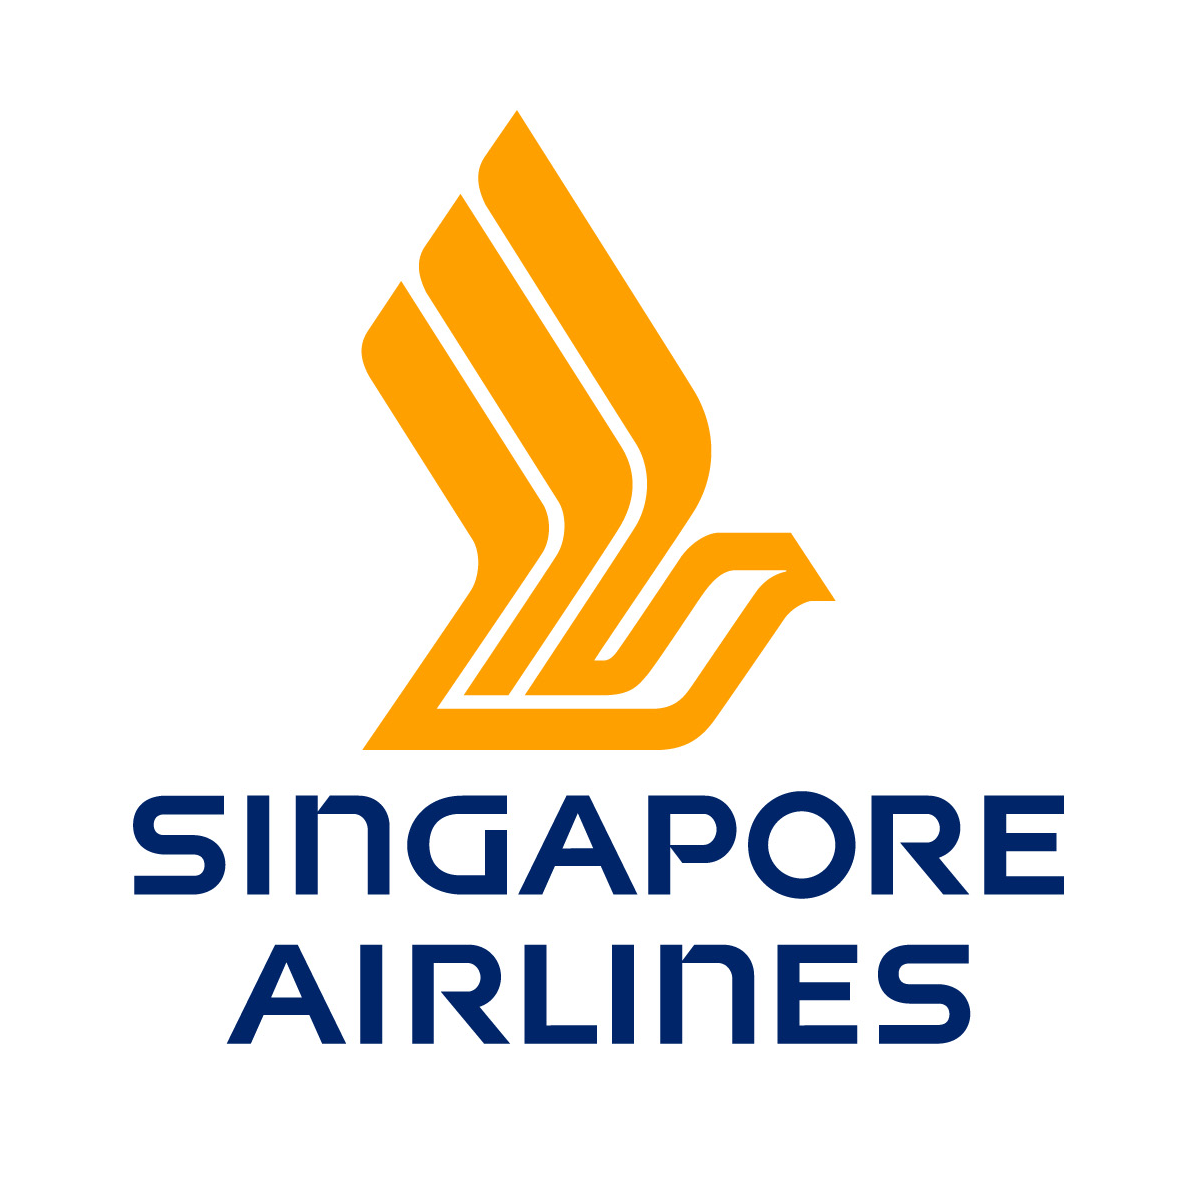 Singapore Airlines Logo Vertical - Singapore Airlines, Transparent background PNG HD thumbnail